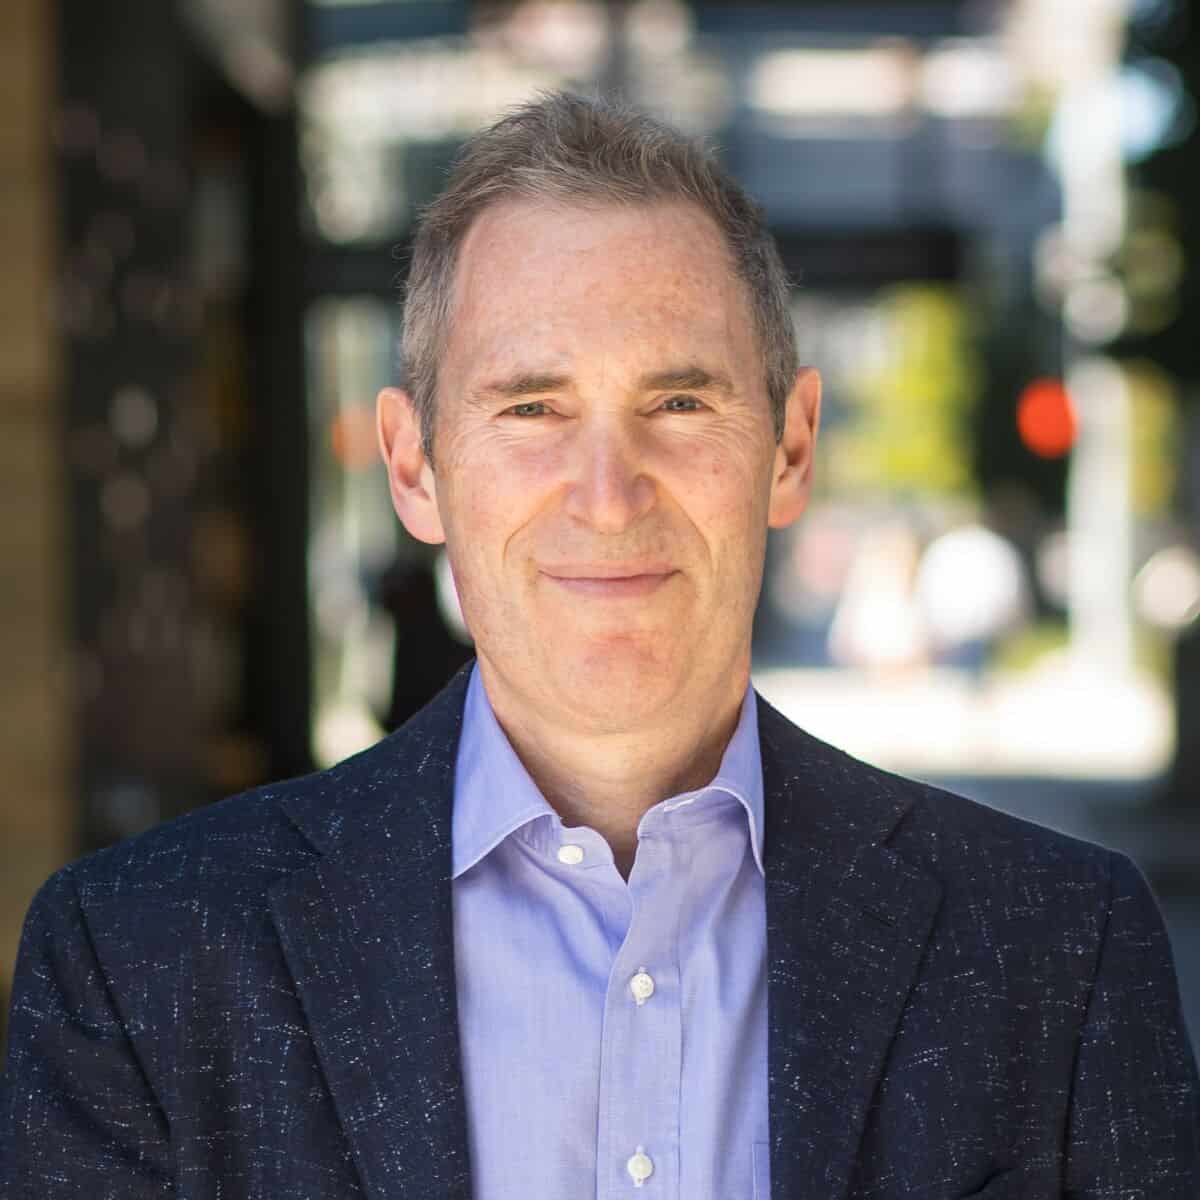 Andy Jassy - Famous CEO